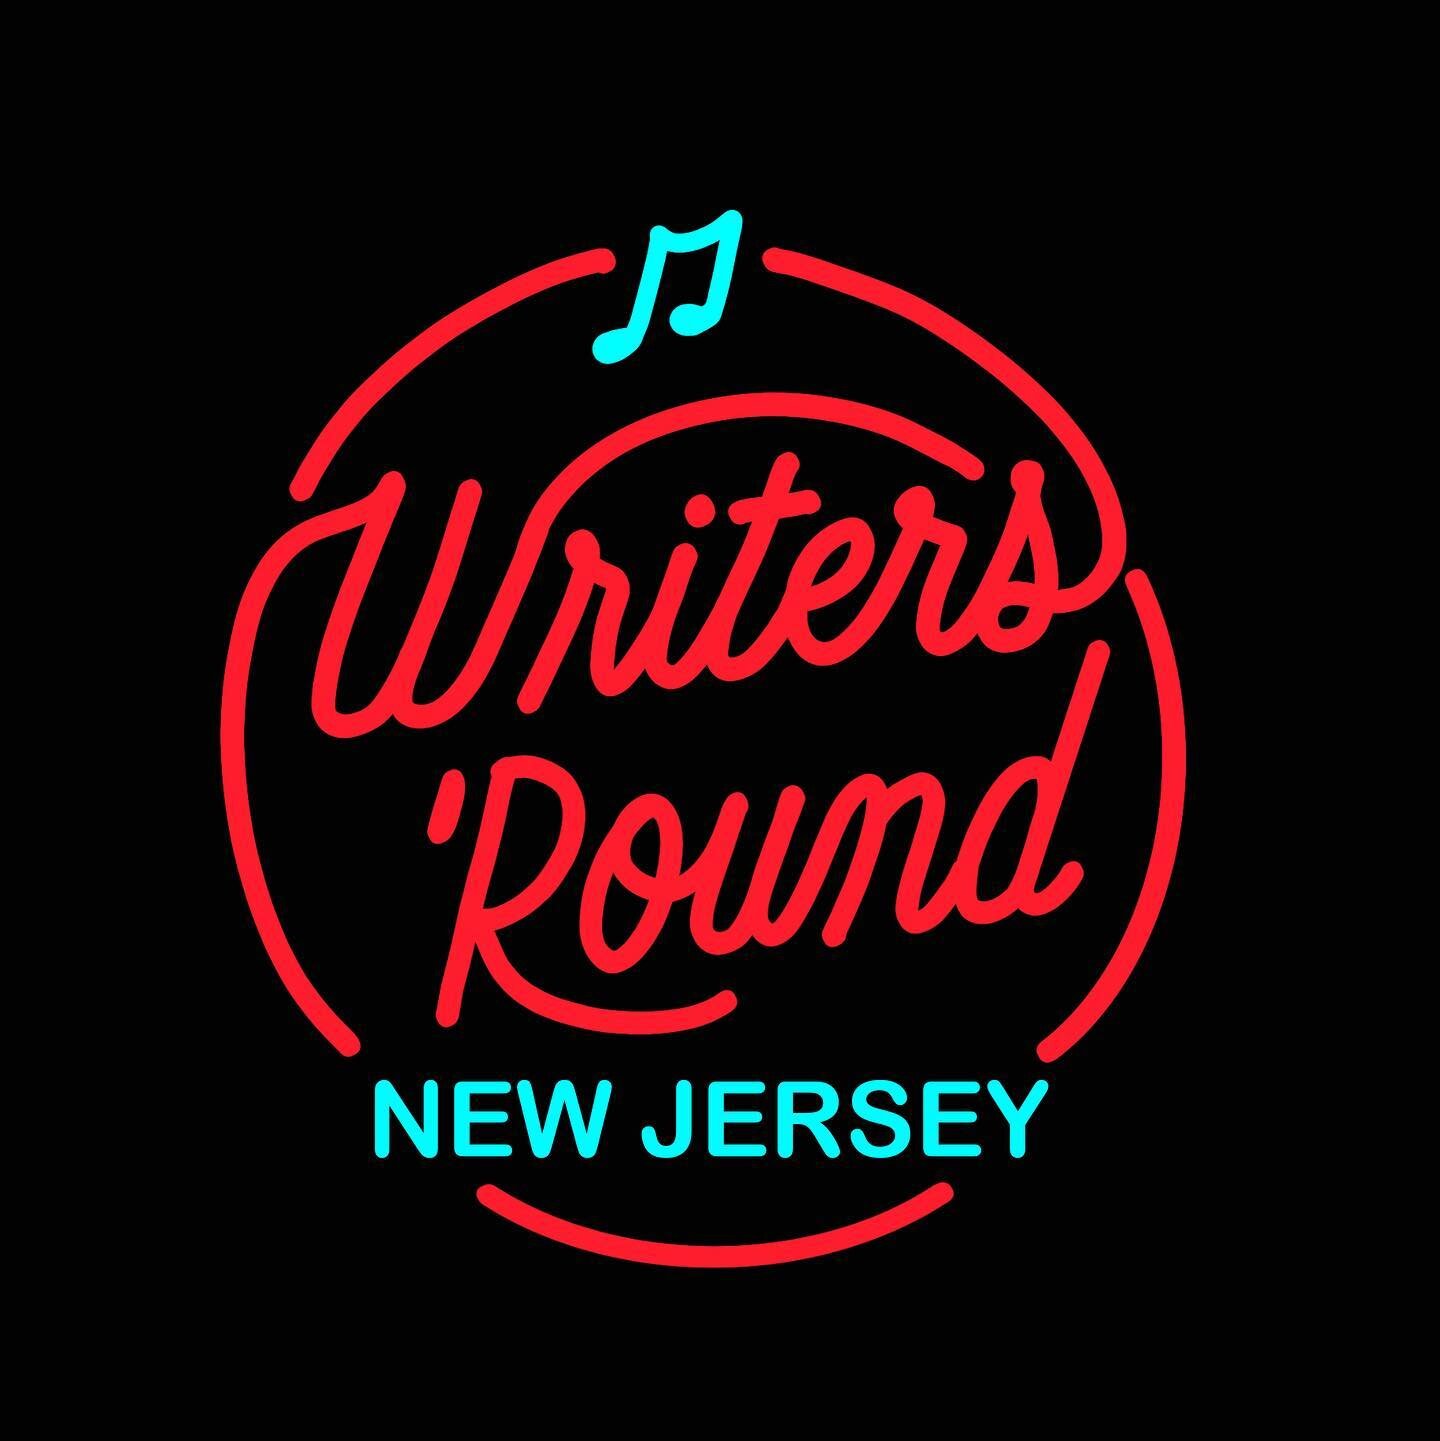 Hey all! We are so excited to announce a new chapter of the Writers &lsquo;Round family - Writers &lsquo;Round NJ. We hope you&rsquo;ll join us on this journey as a performer or audience member - or maybe both!

Who are we:
Jackie June (@jackiejunemu